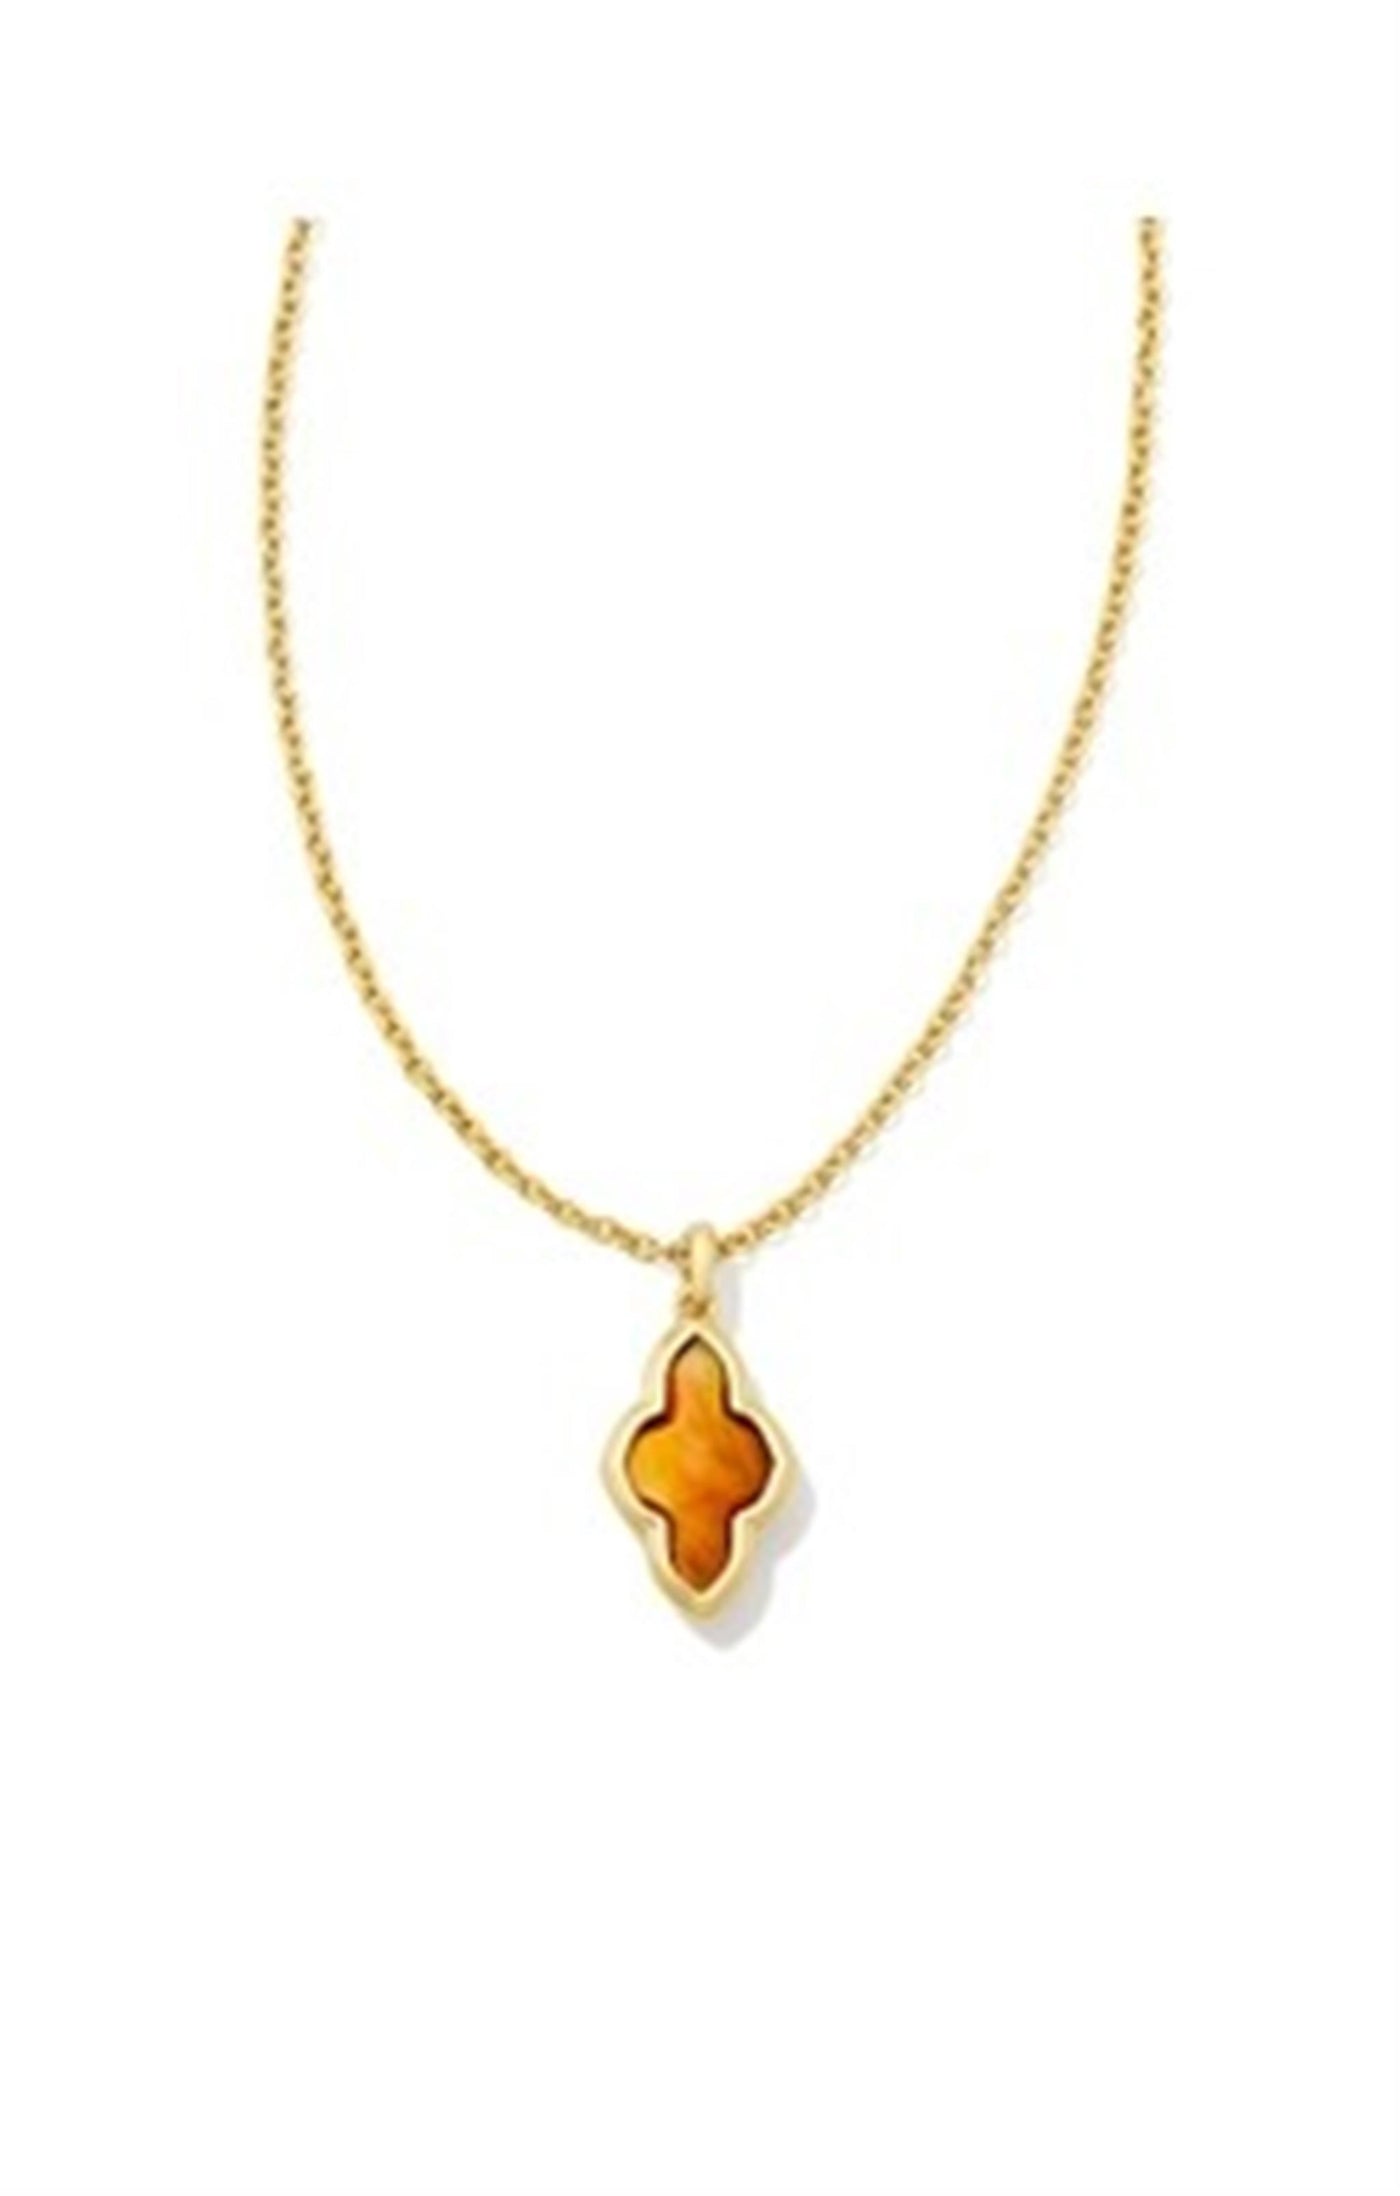 Gold Tone Necklace Featuring Marbled Amber Illusion by Kendra Scott